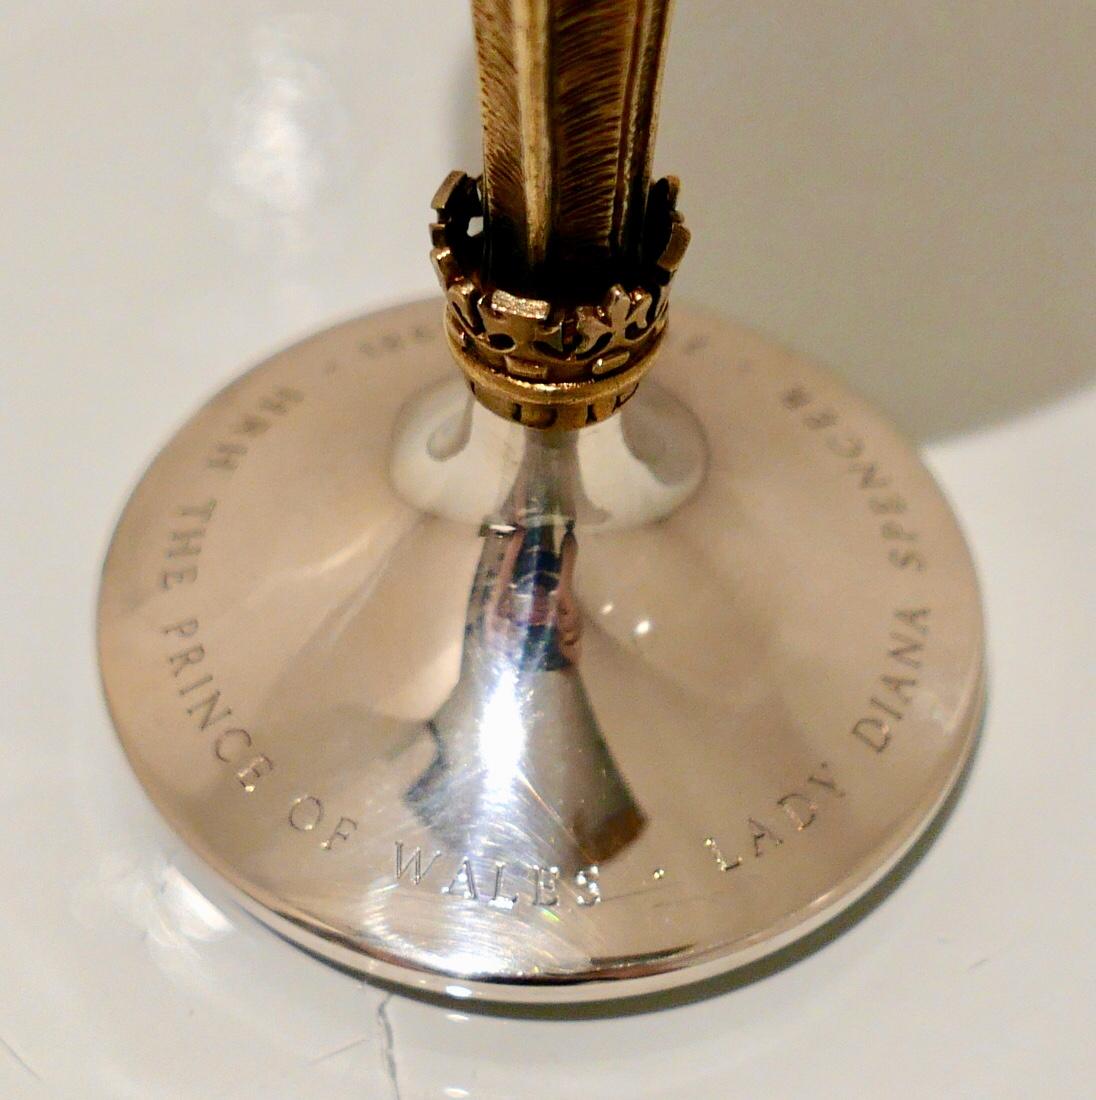 A stunning and highly collectable Stuart Devlin commemorative silver wine goblet designed with an unusual shaped bowl and stylish Prince of Wales feathers stem which is taken (copied) from the heraldic badge of the Prince of Wales.

Weight: 10.8